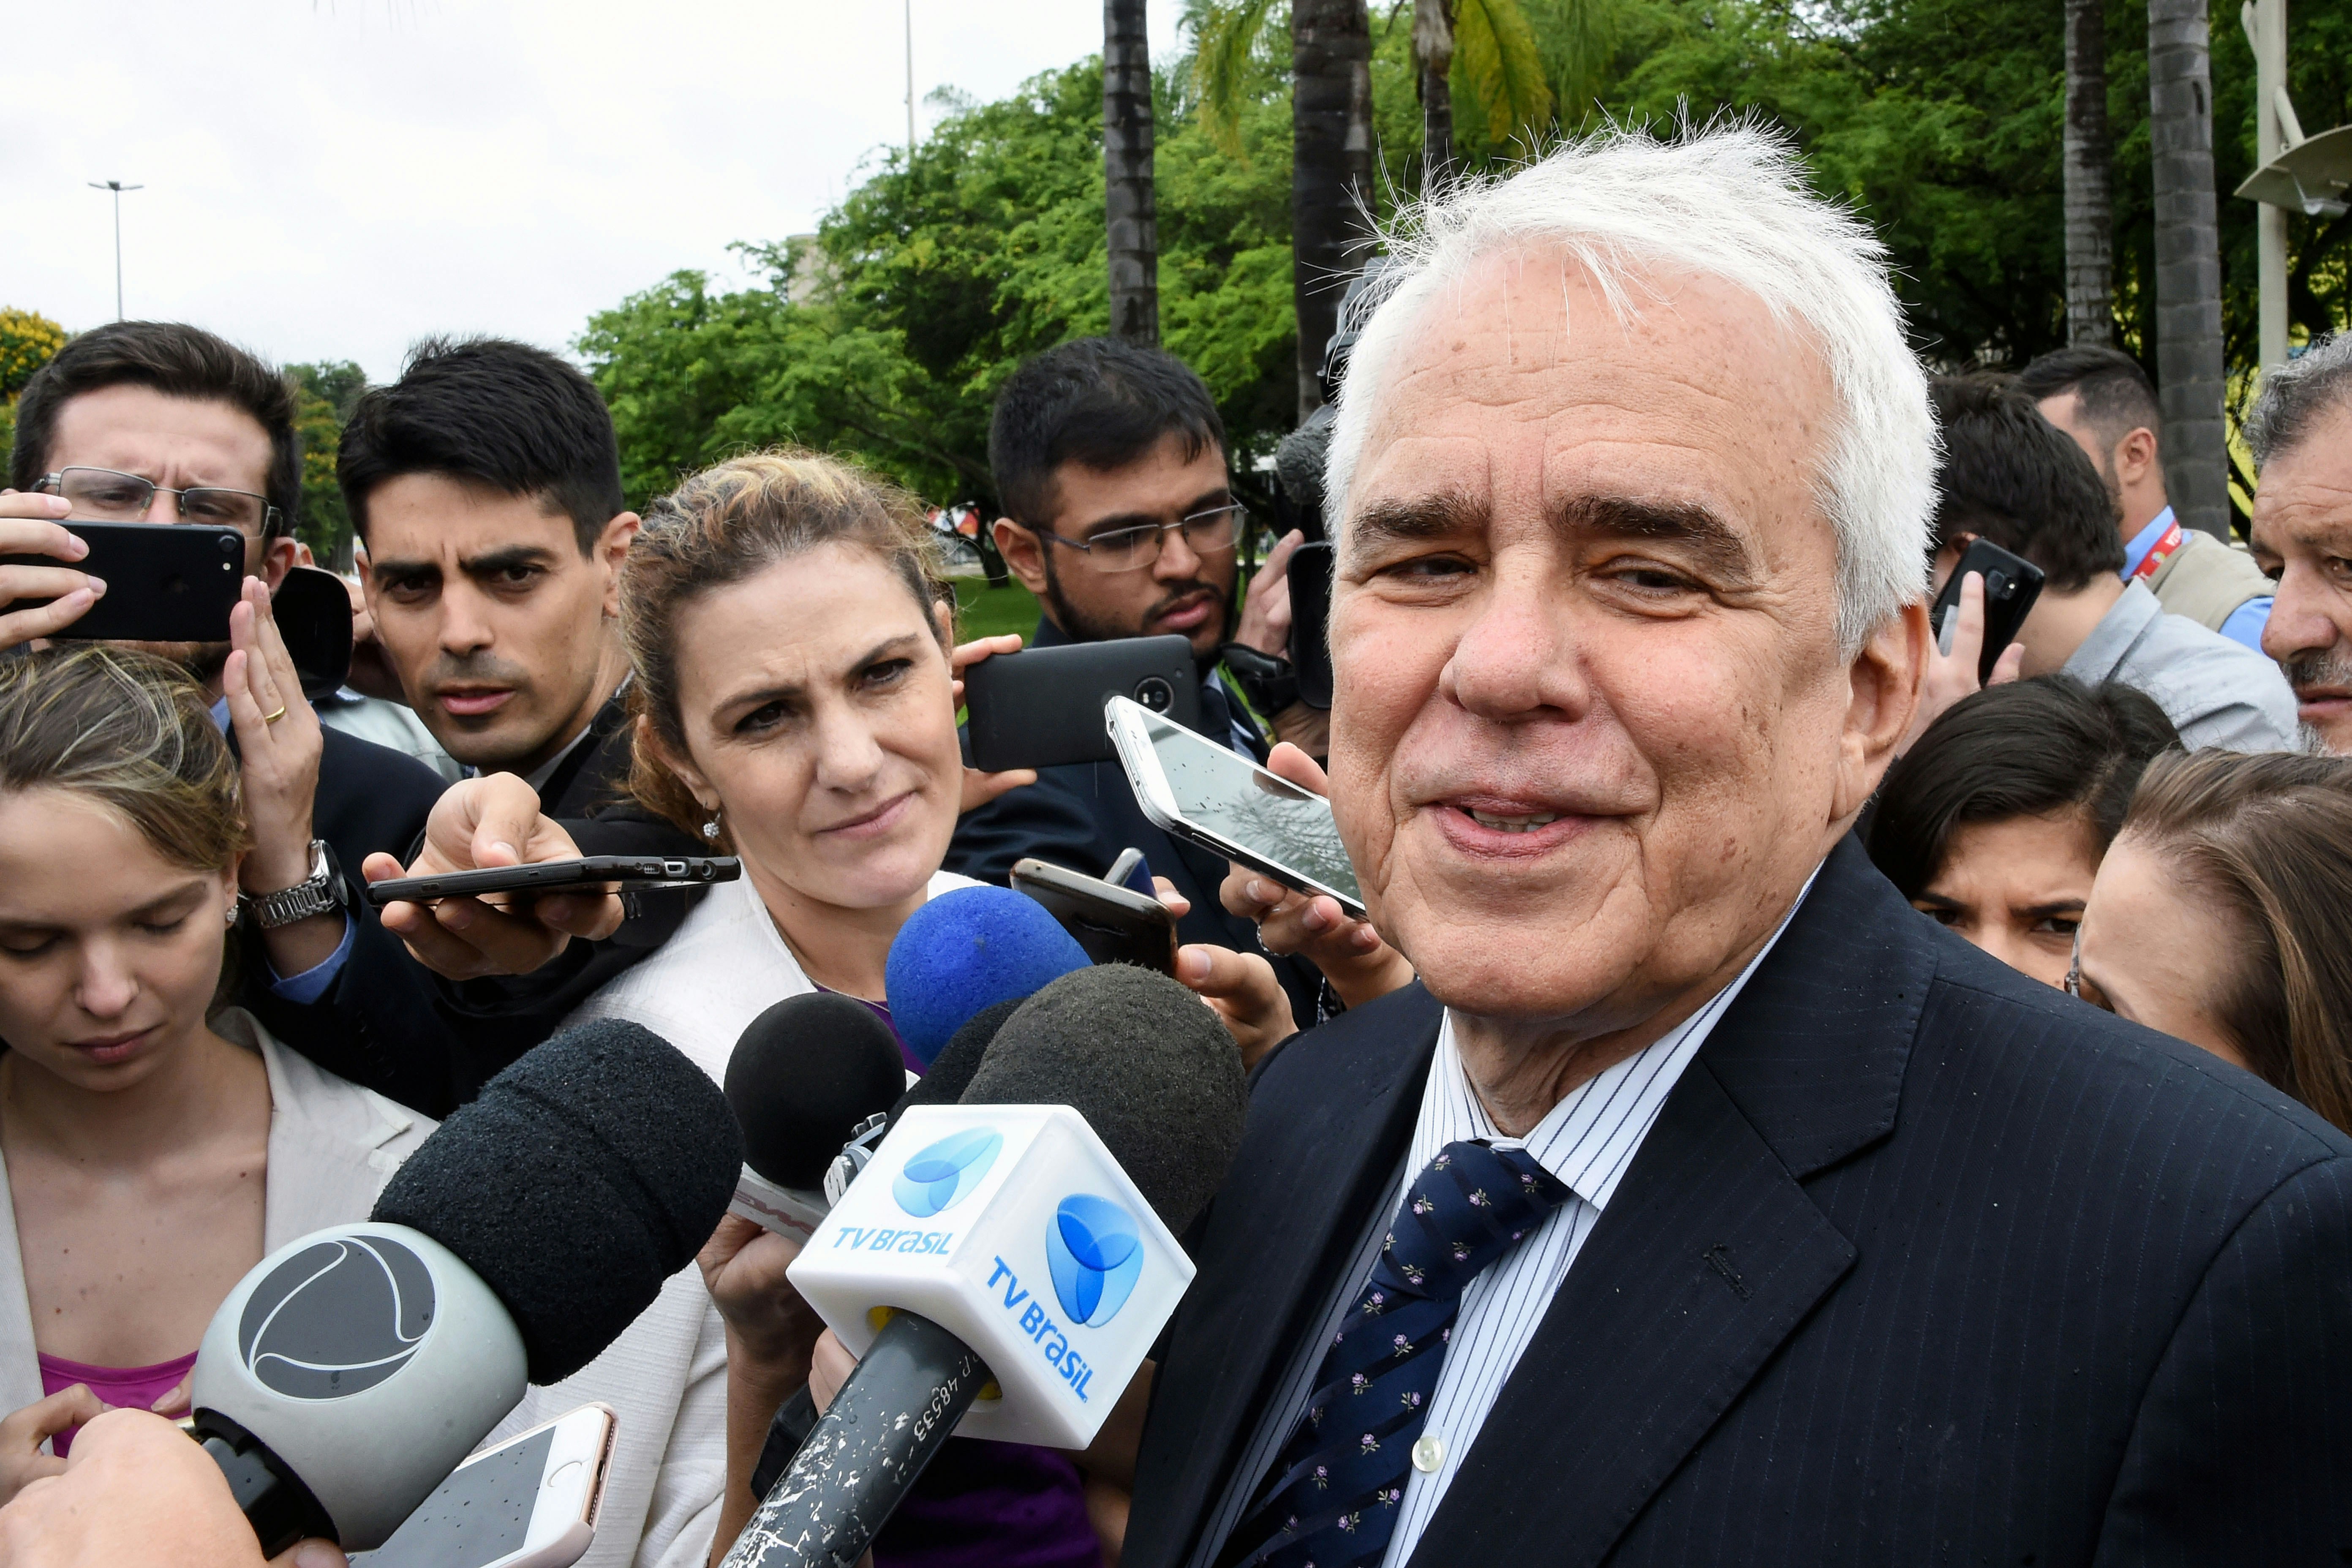 Roberto Castello Branco, who was appointed by Brazilian President-elect Jair Bolsonaro as President of Petrobras, addresses the press outside the transitional government's headquarters in Brasilia on November 20, 2018. (Photo by EVARISTO SA / AFP)        (Photo credit should read EVARISTO SA/AFP/Getty Images)